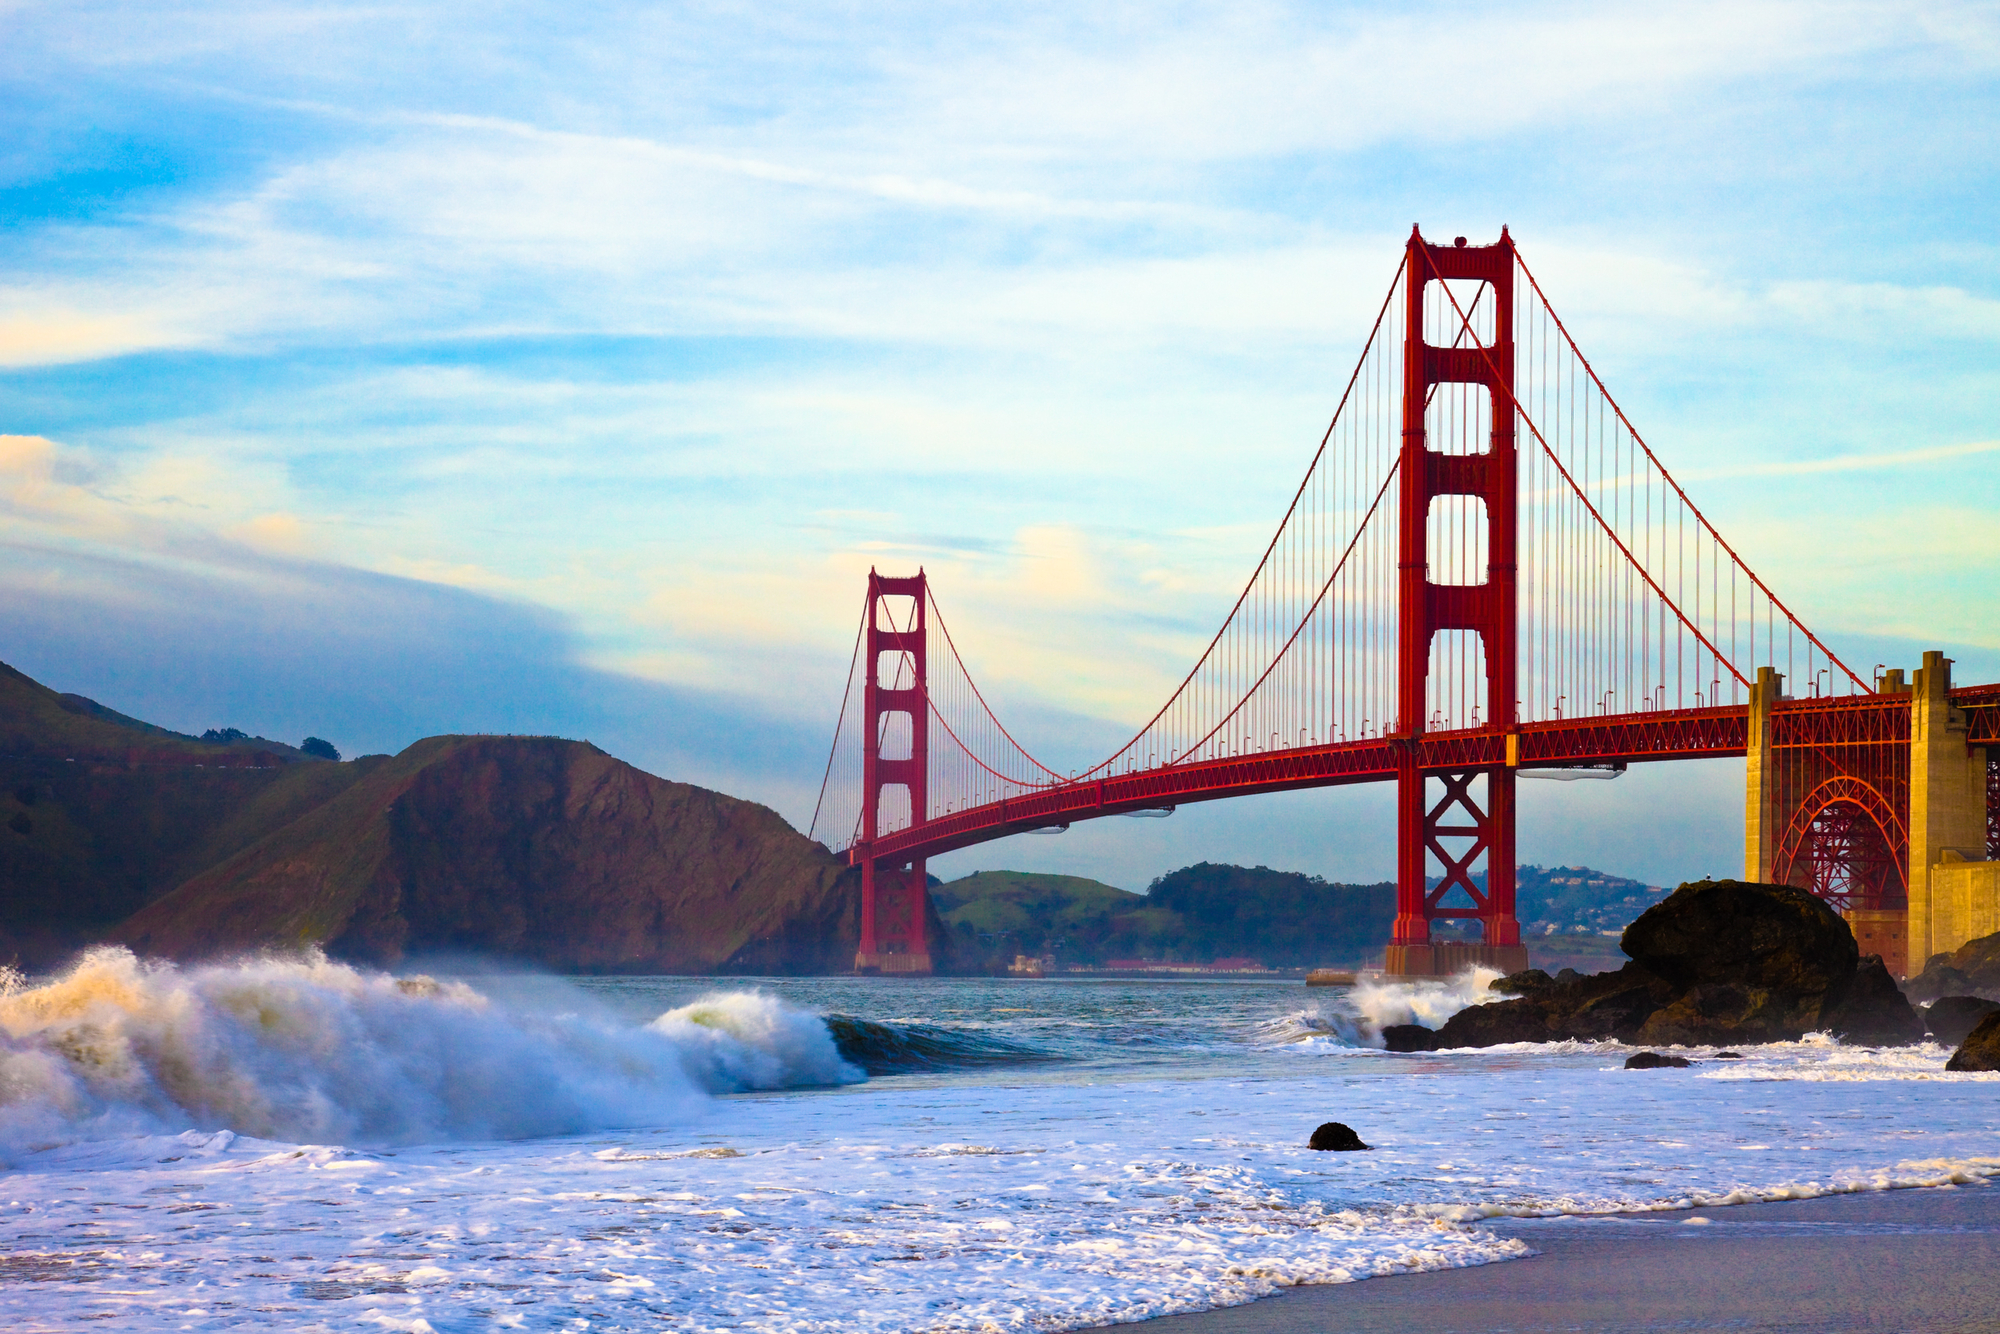 Digital marketing services in the Bay Area